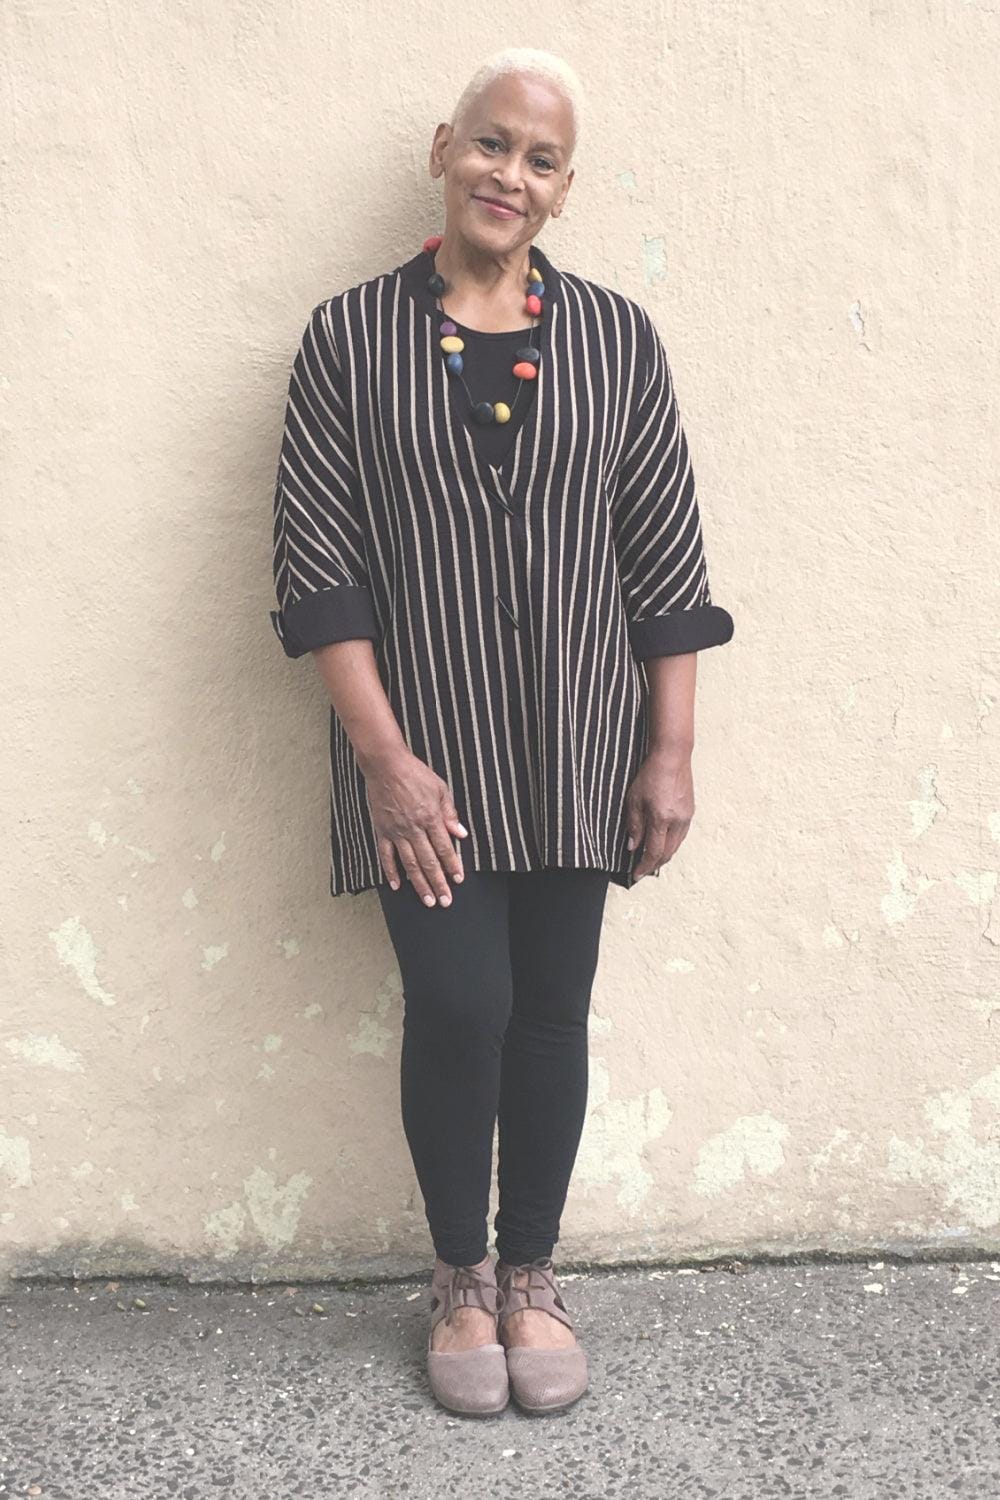 Women's Black Stripe Jacke is being worn by a smiling older woman resting against a wall. She is also wearing black leggings and a multicolored single strand necklace. She is smiling.